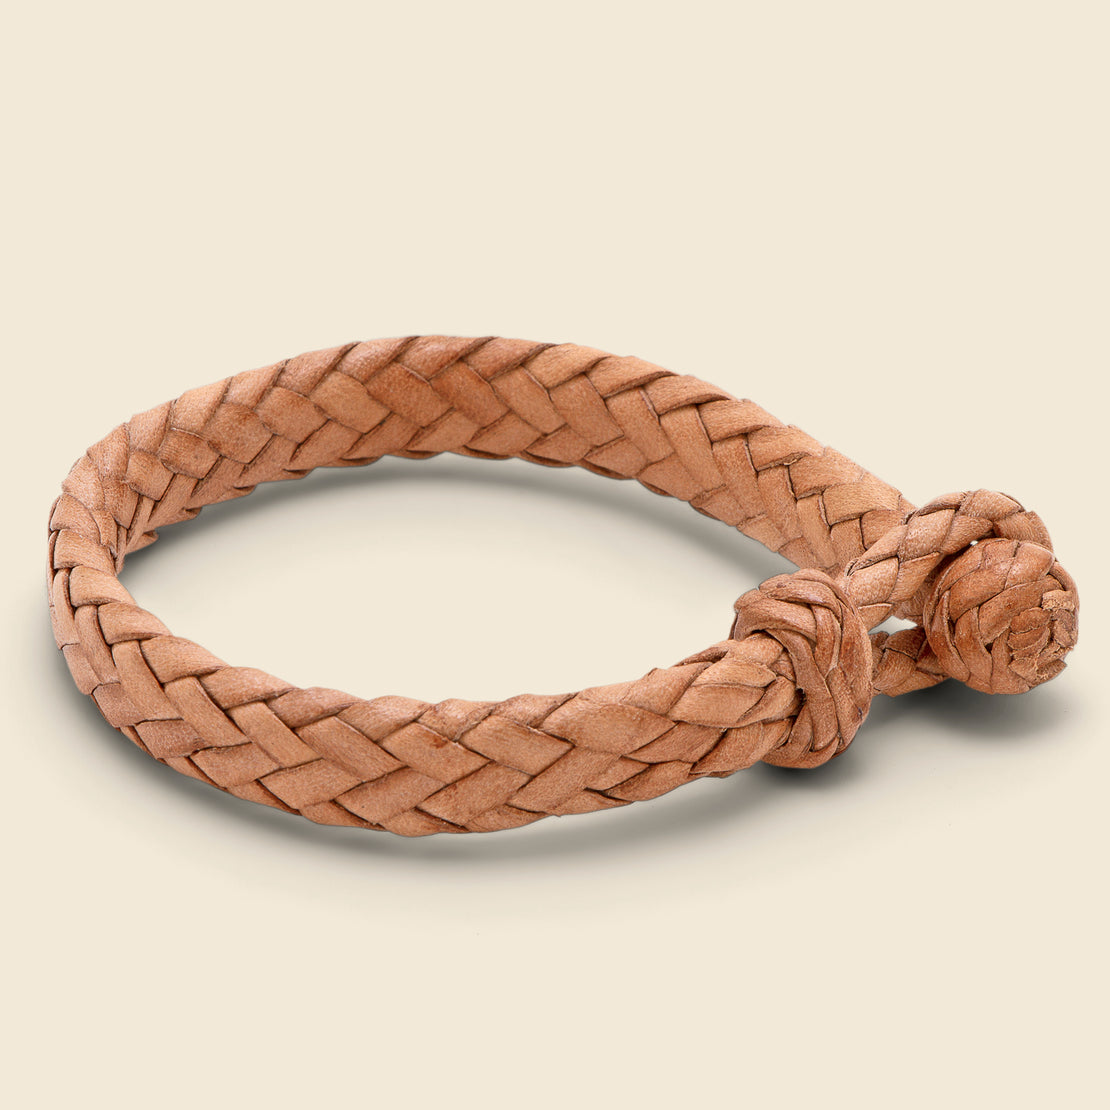 Wide Flat Weaved Bracelet - Tan - Chamula - STAG Provisions - Accessories - Cuffs